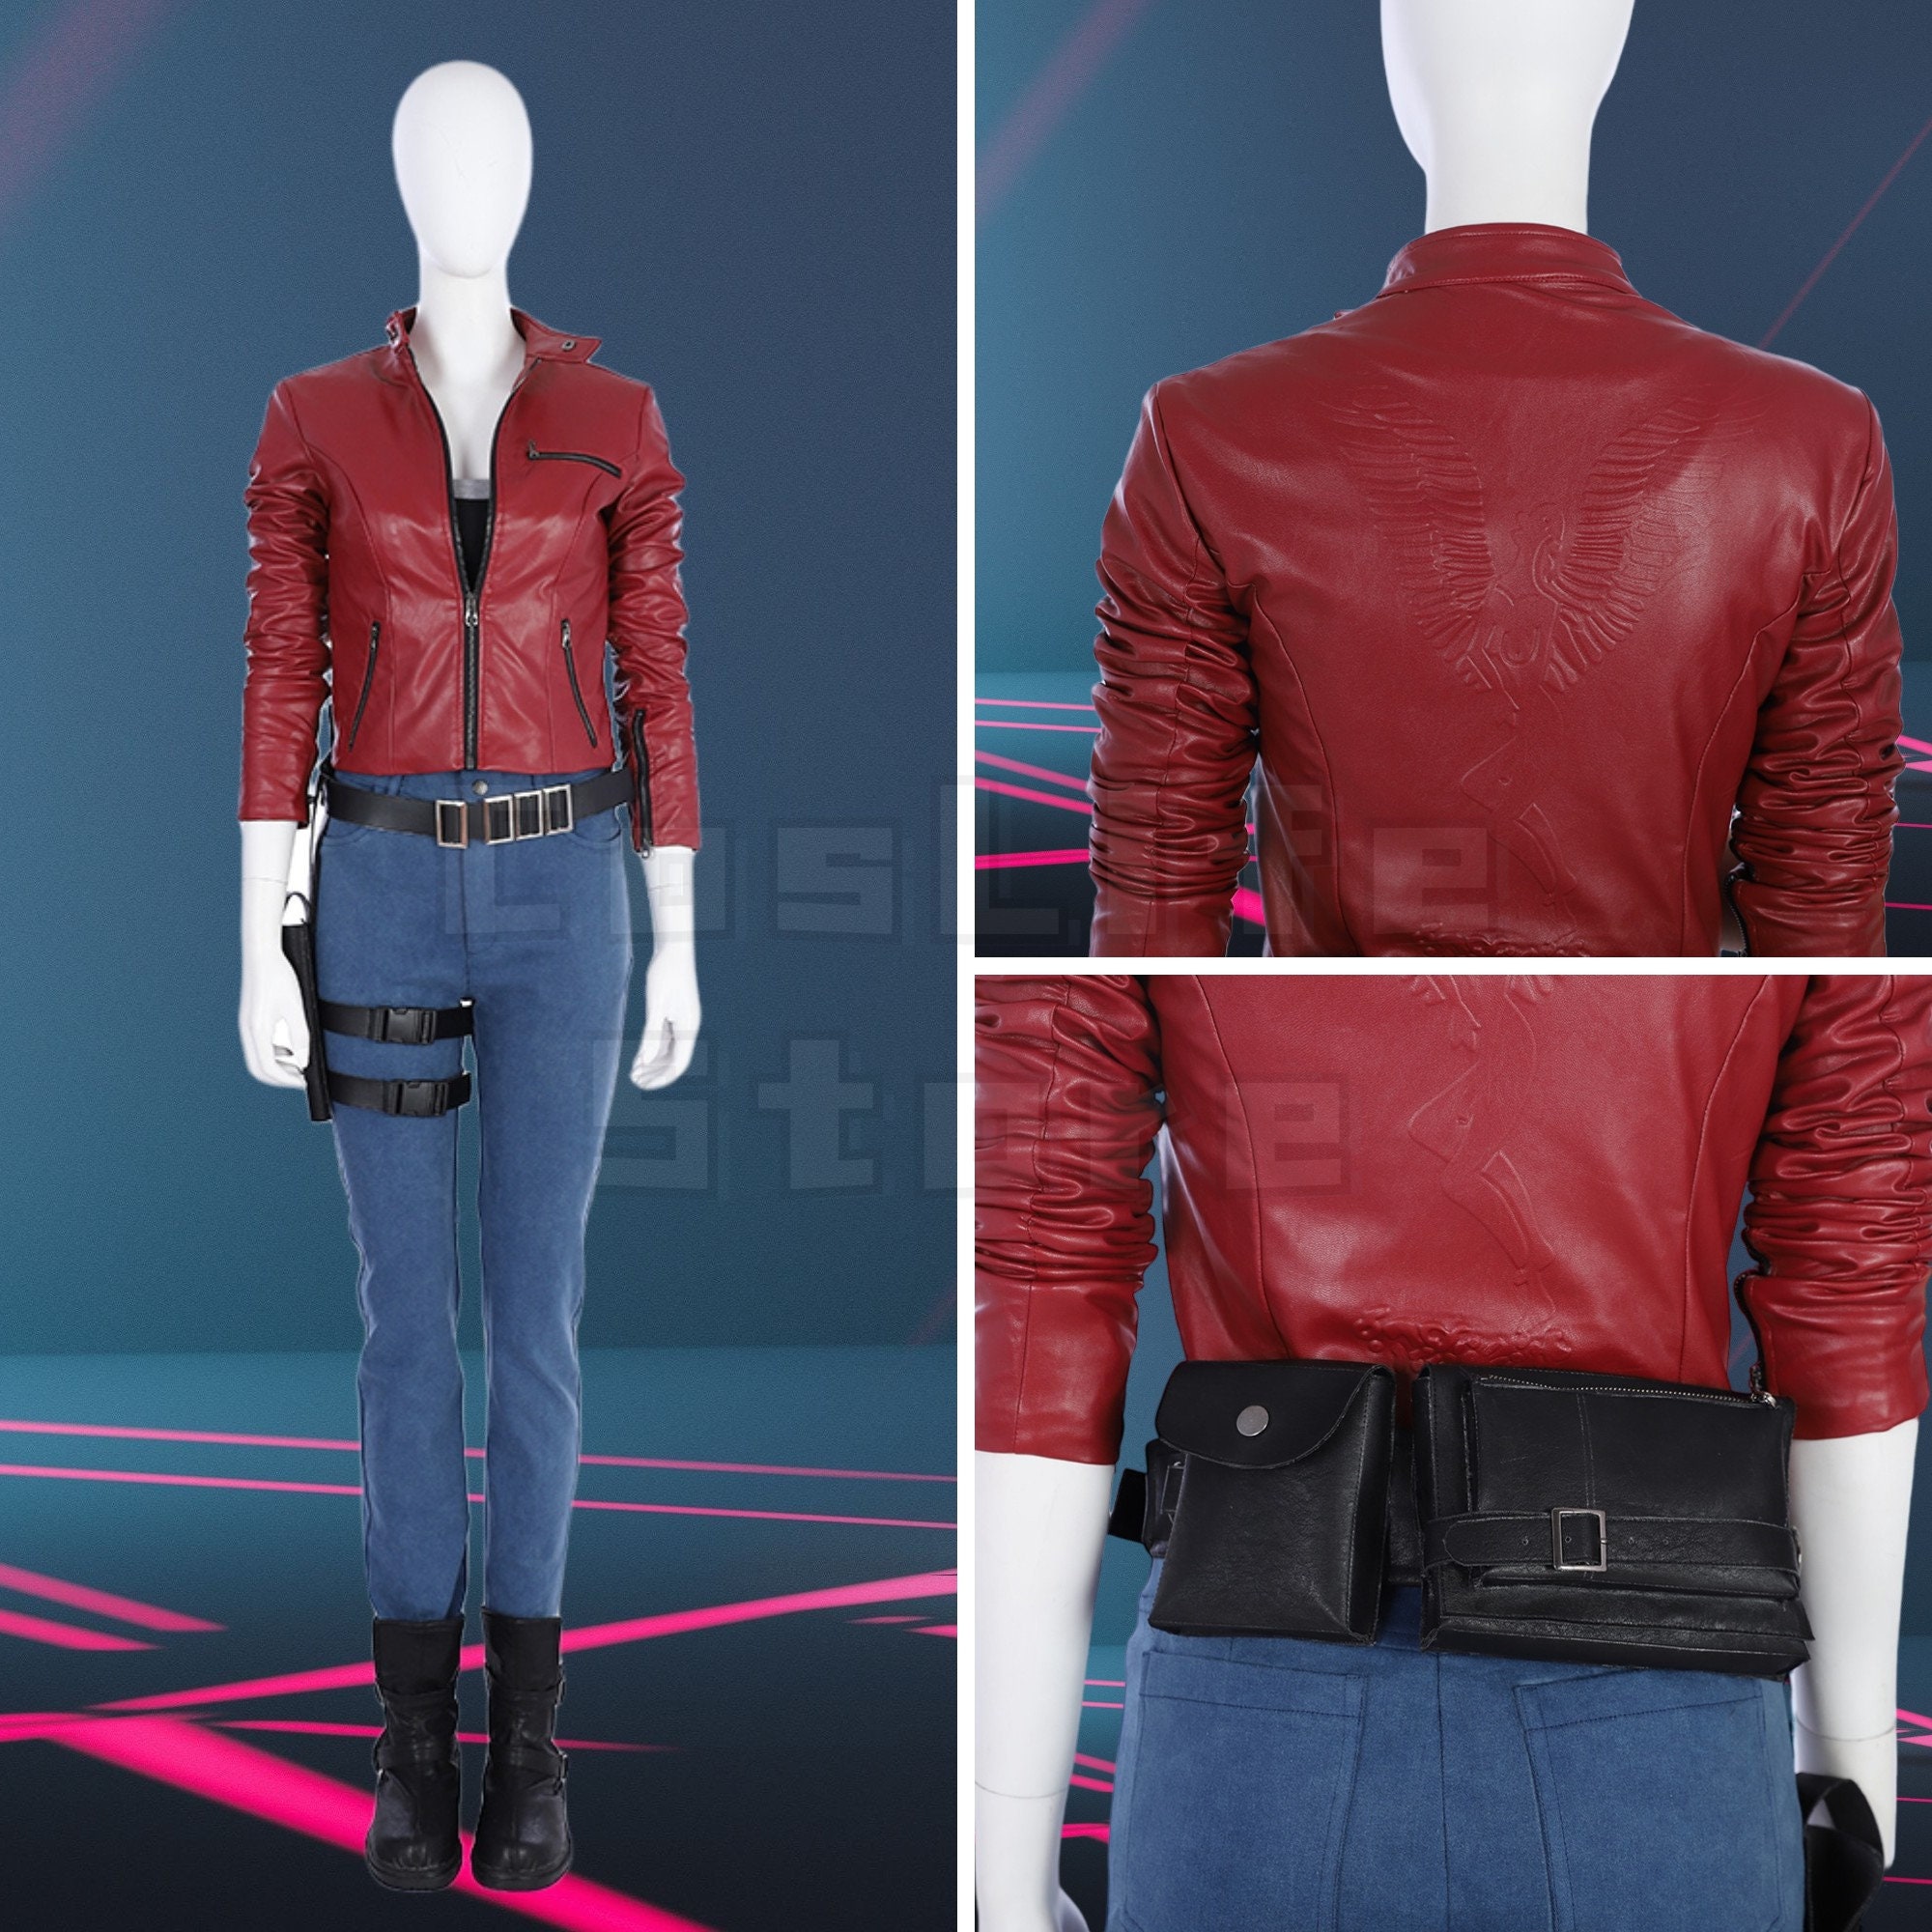 Resident Evil 2 Remake Claire Redfield Jacket Cosplay Costume - Etsy